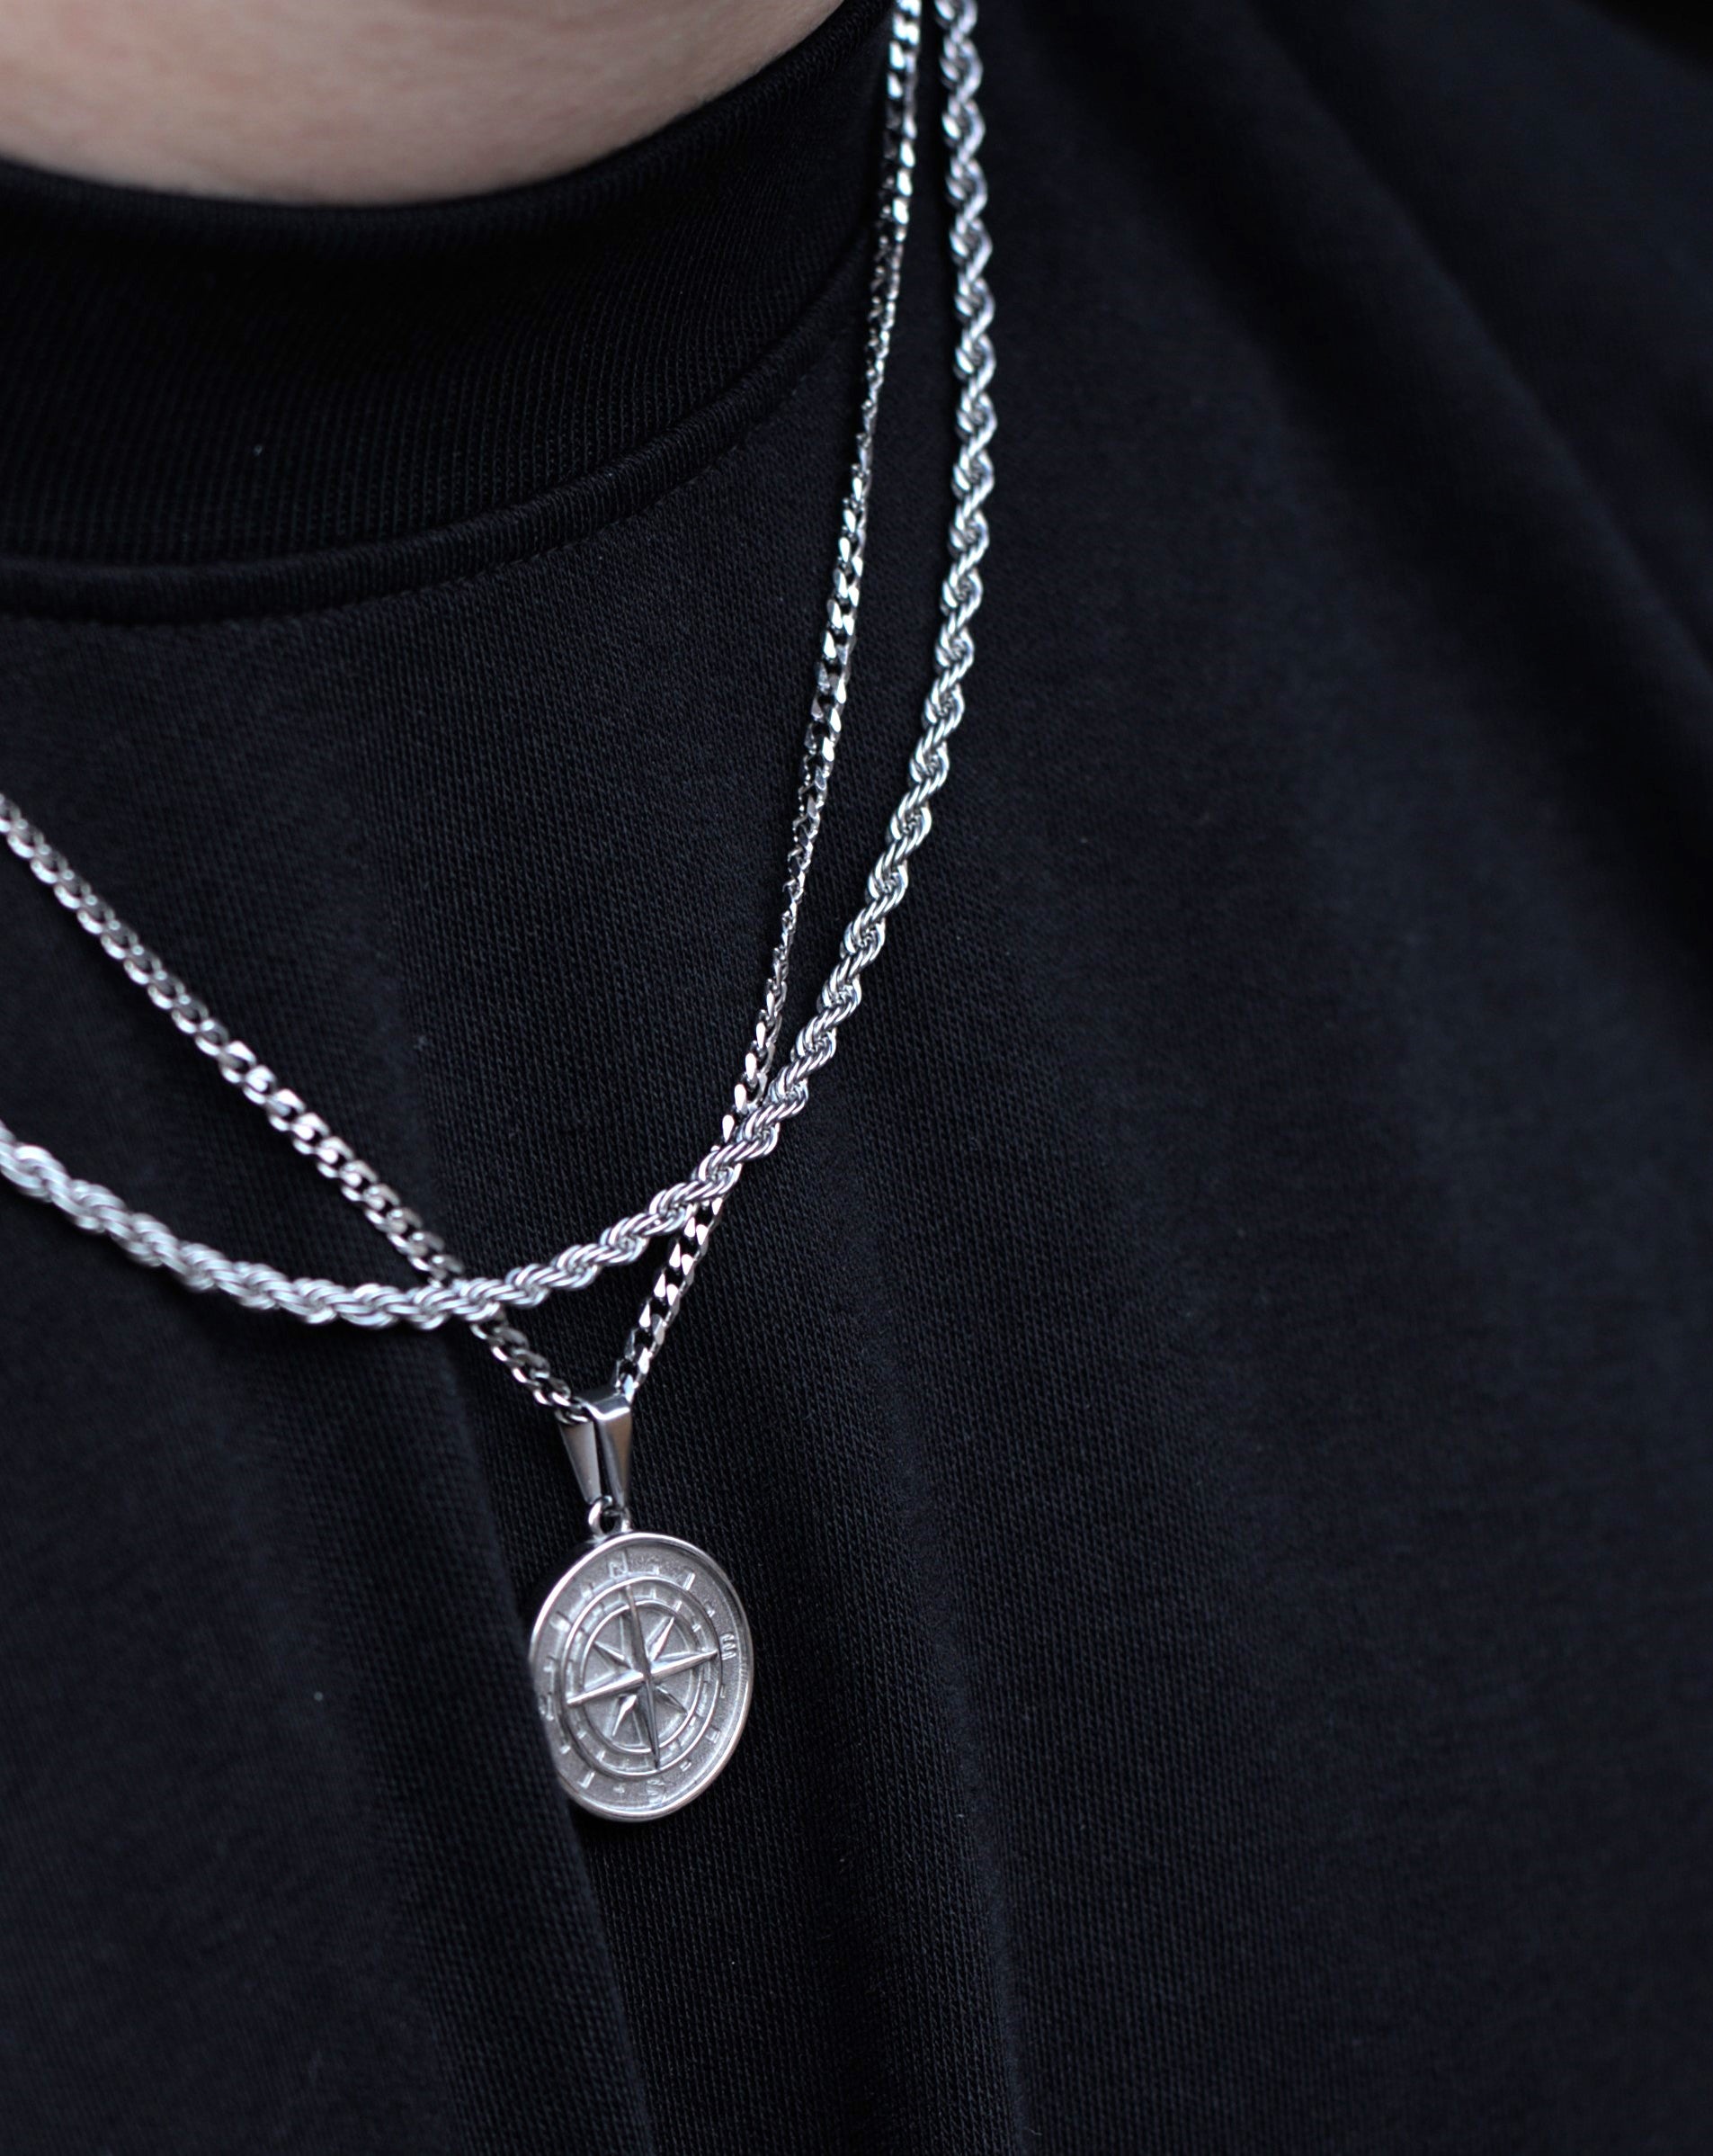 Silver Rope Chain Necklace Men's Jewellery